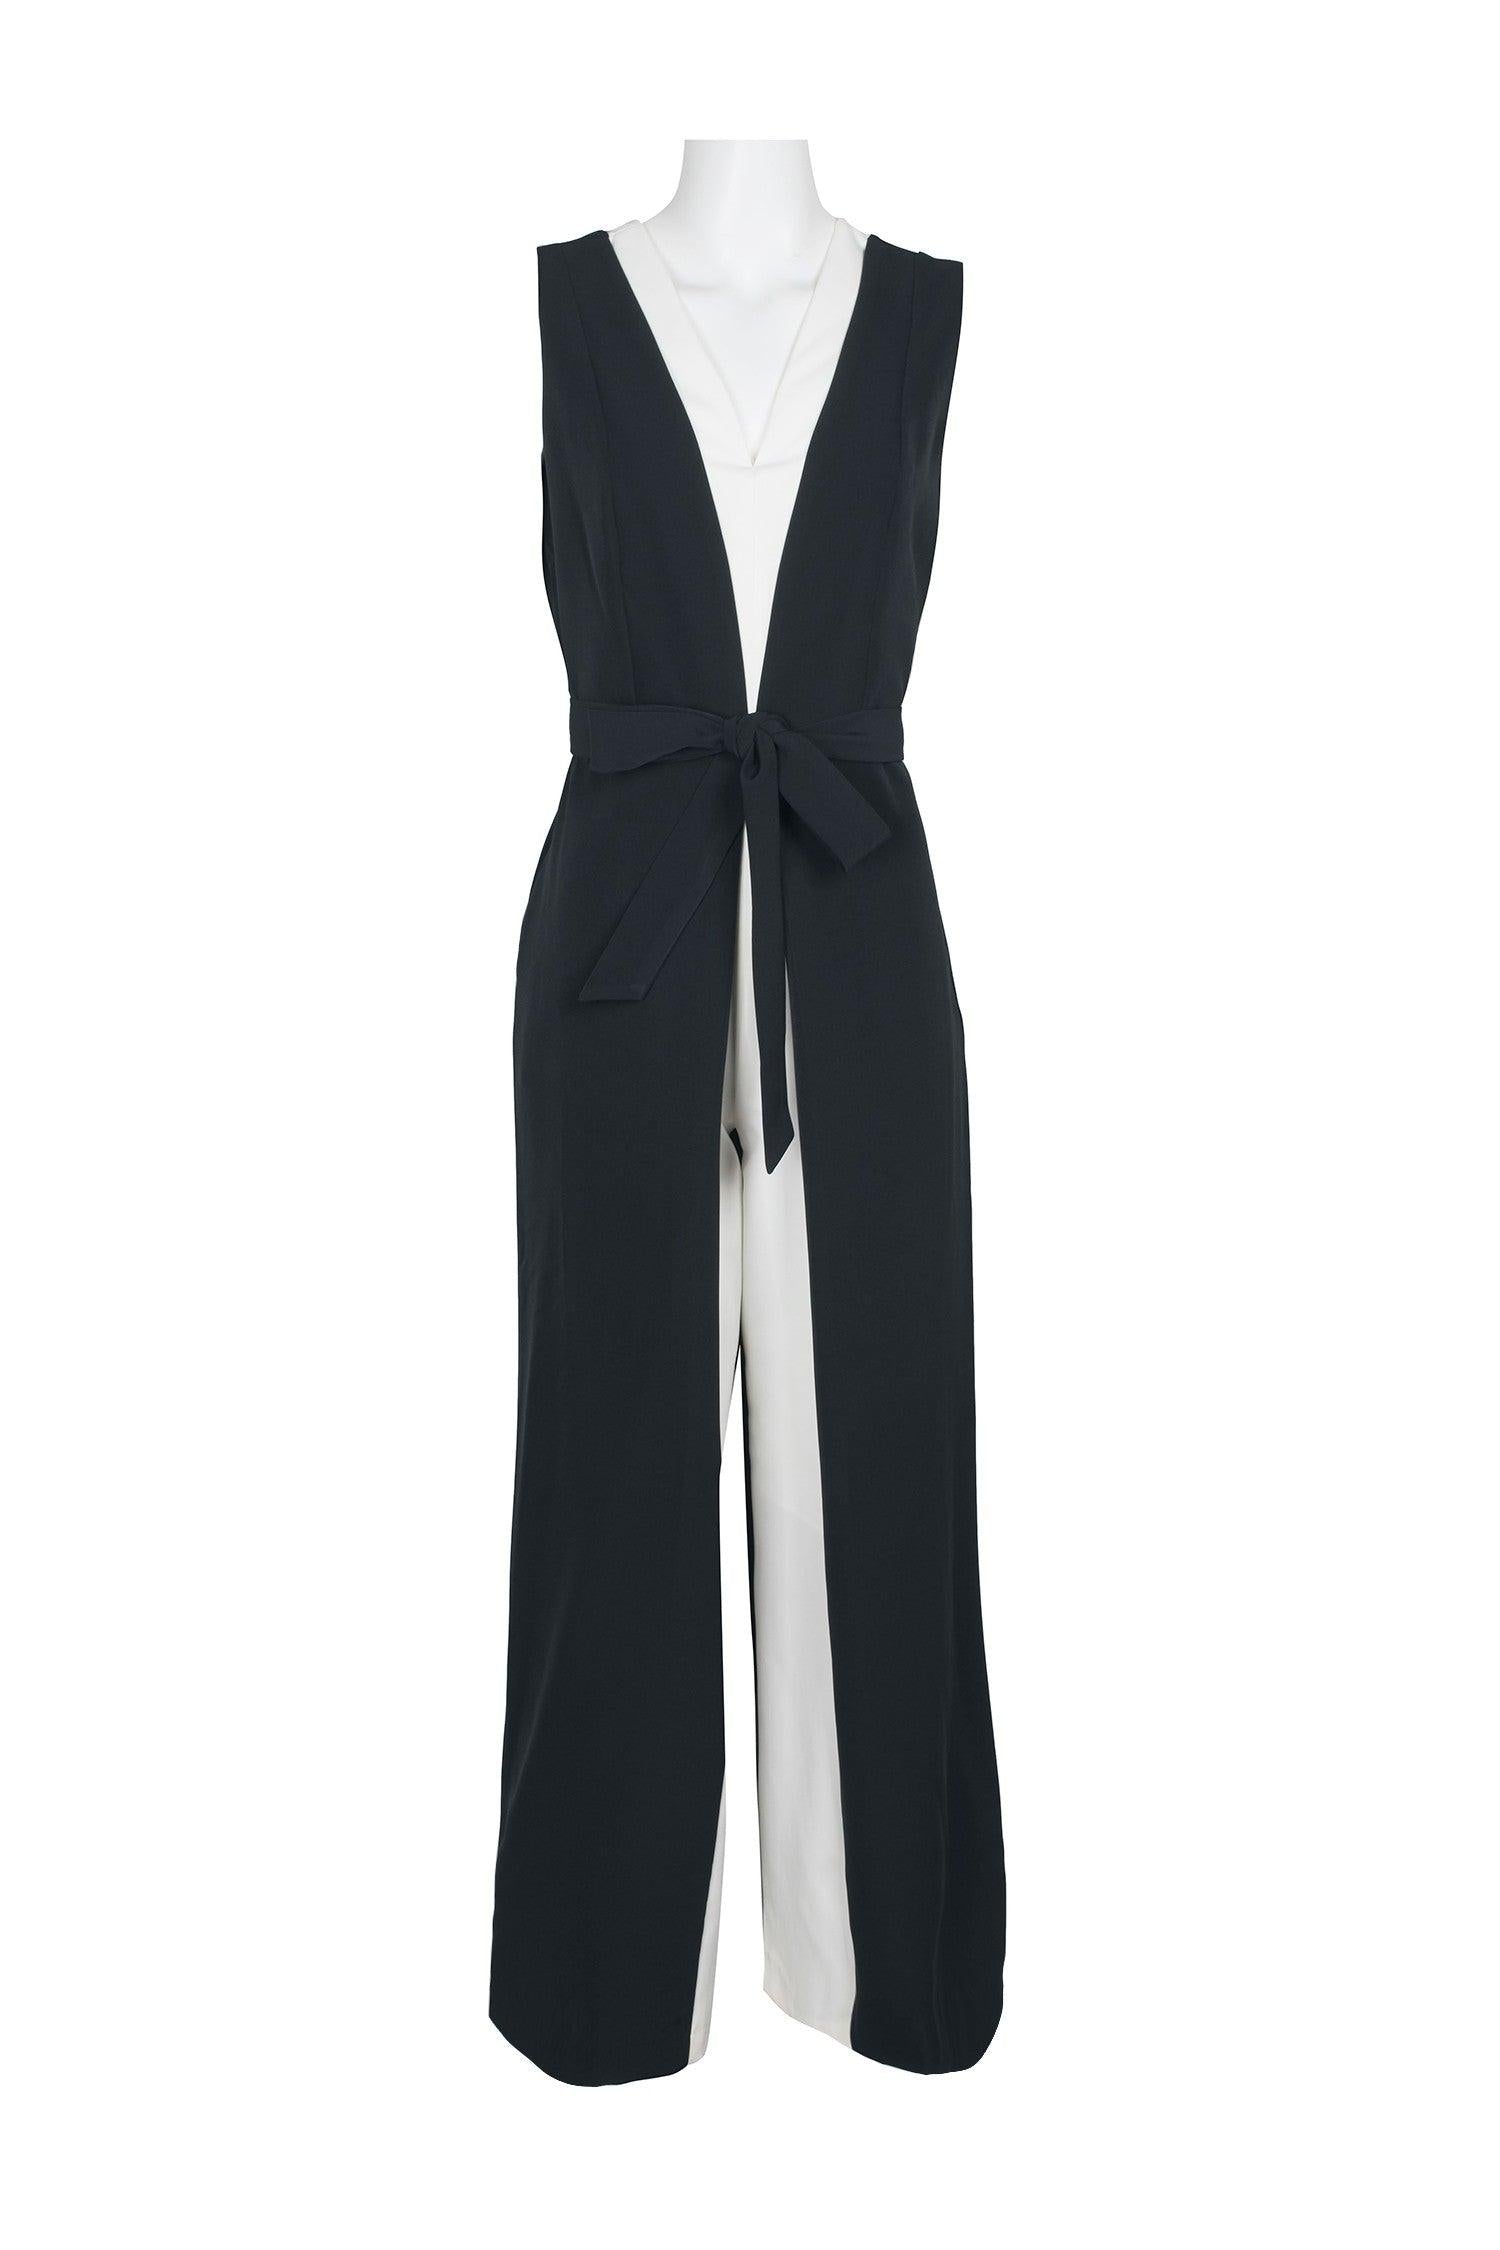 Tahari Long Formal Sleeveless Jumpsuit | The Dress Outlet